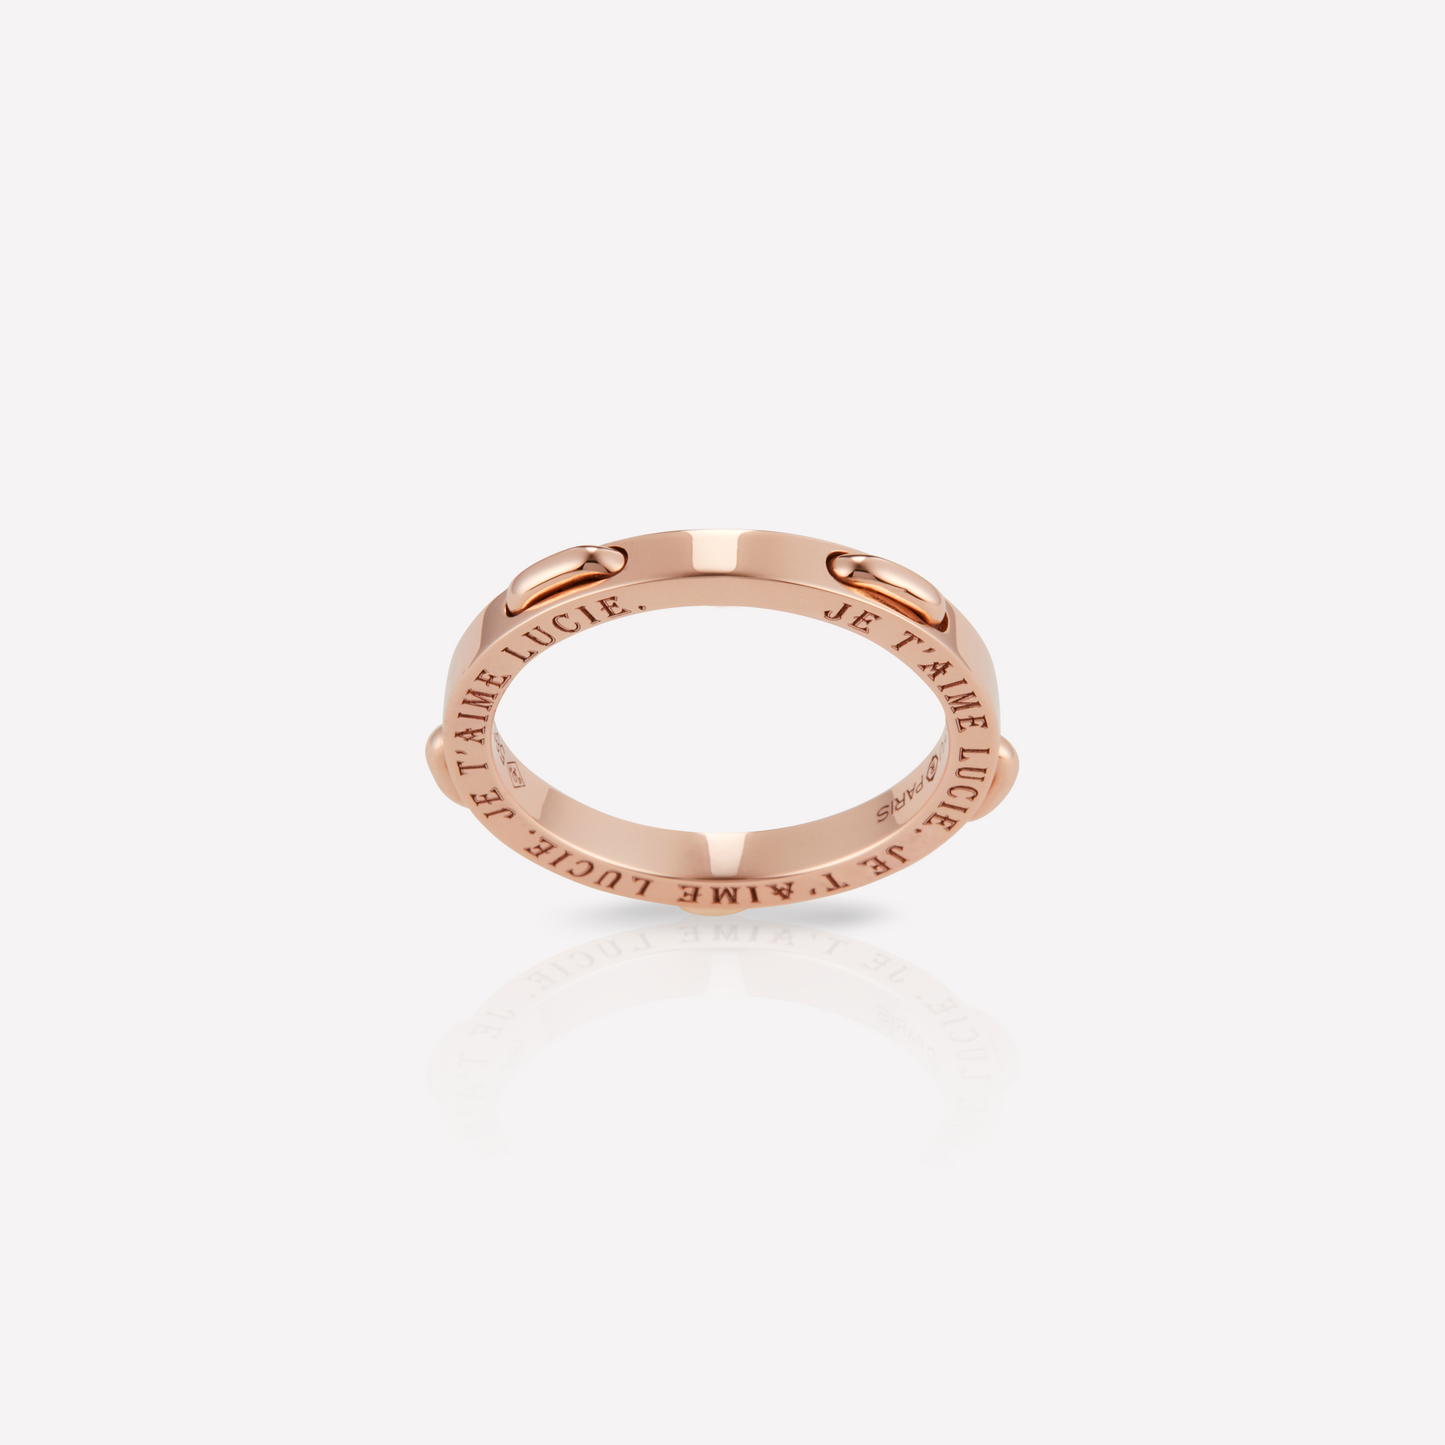 Twined 3.0 Ring